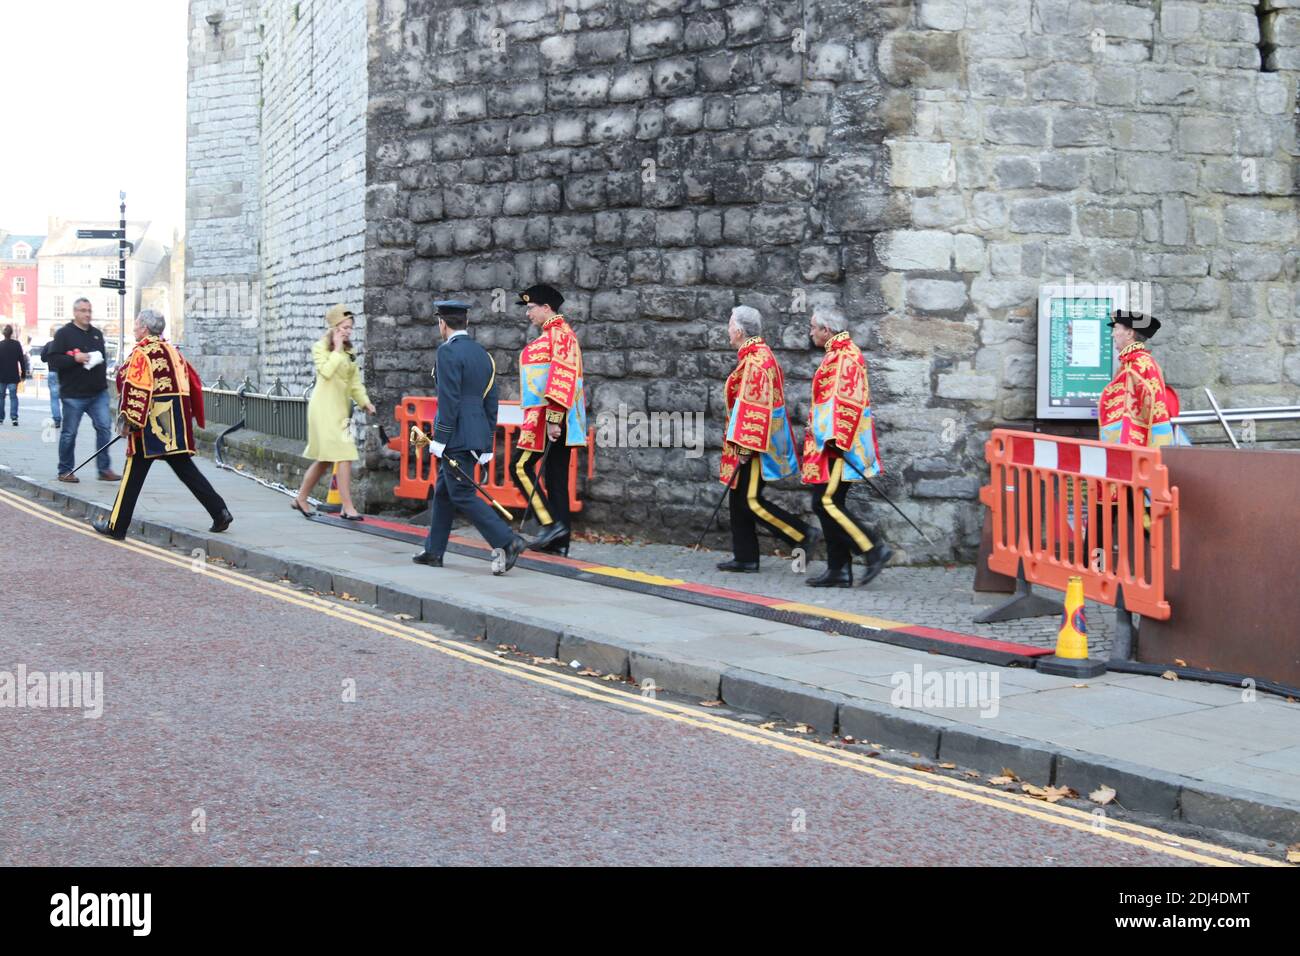 Netflix Drama the Crown filming the Investiture of Prince Charles at Caernarfon castles, North Wales Credit: Mike Clarke/ Alamy Stock Photos Stock Photo